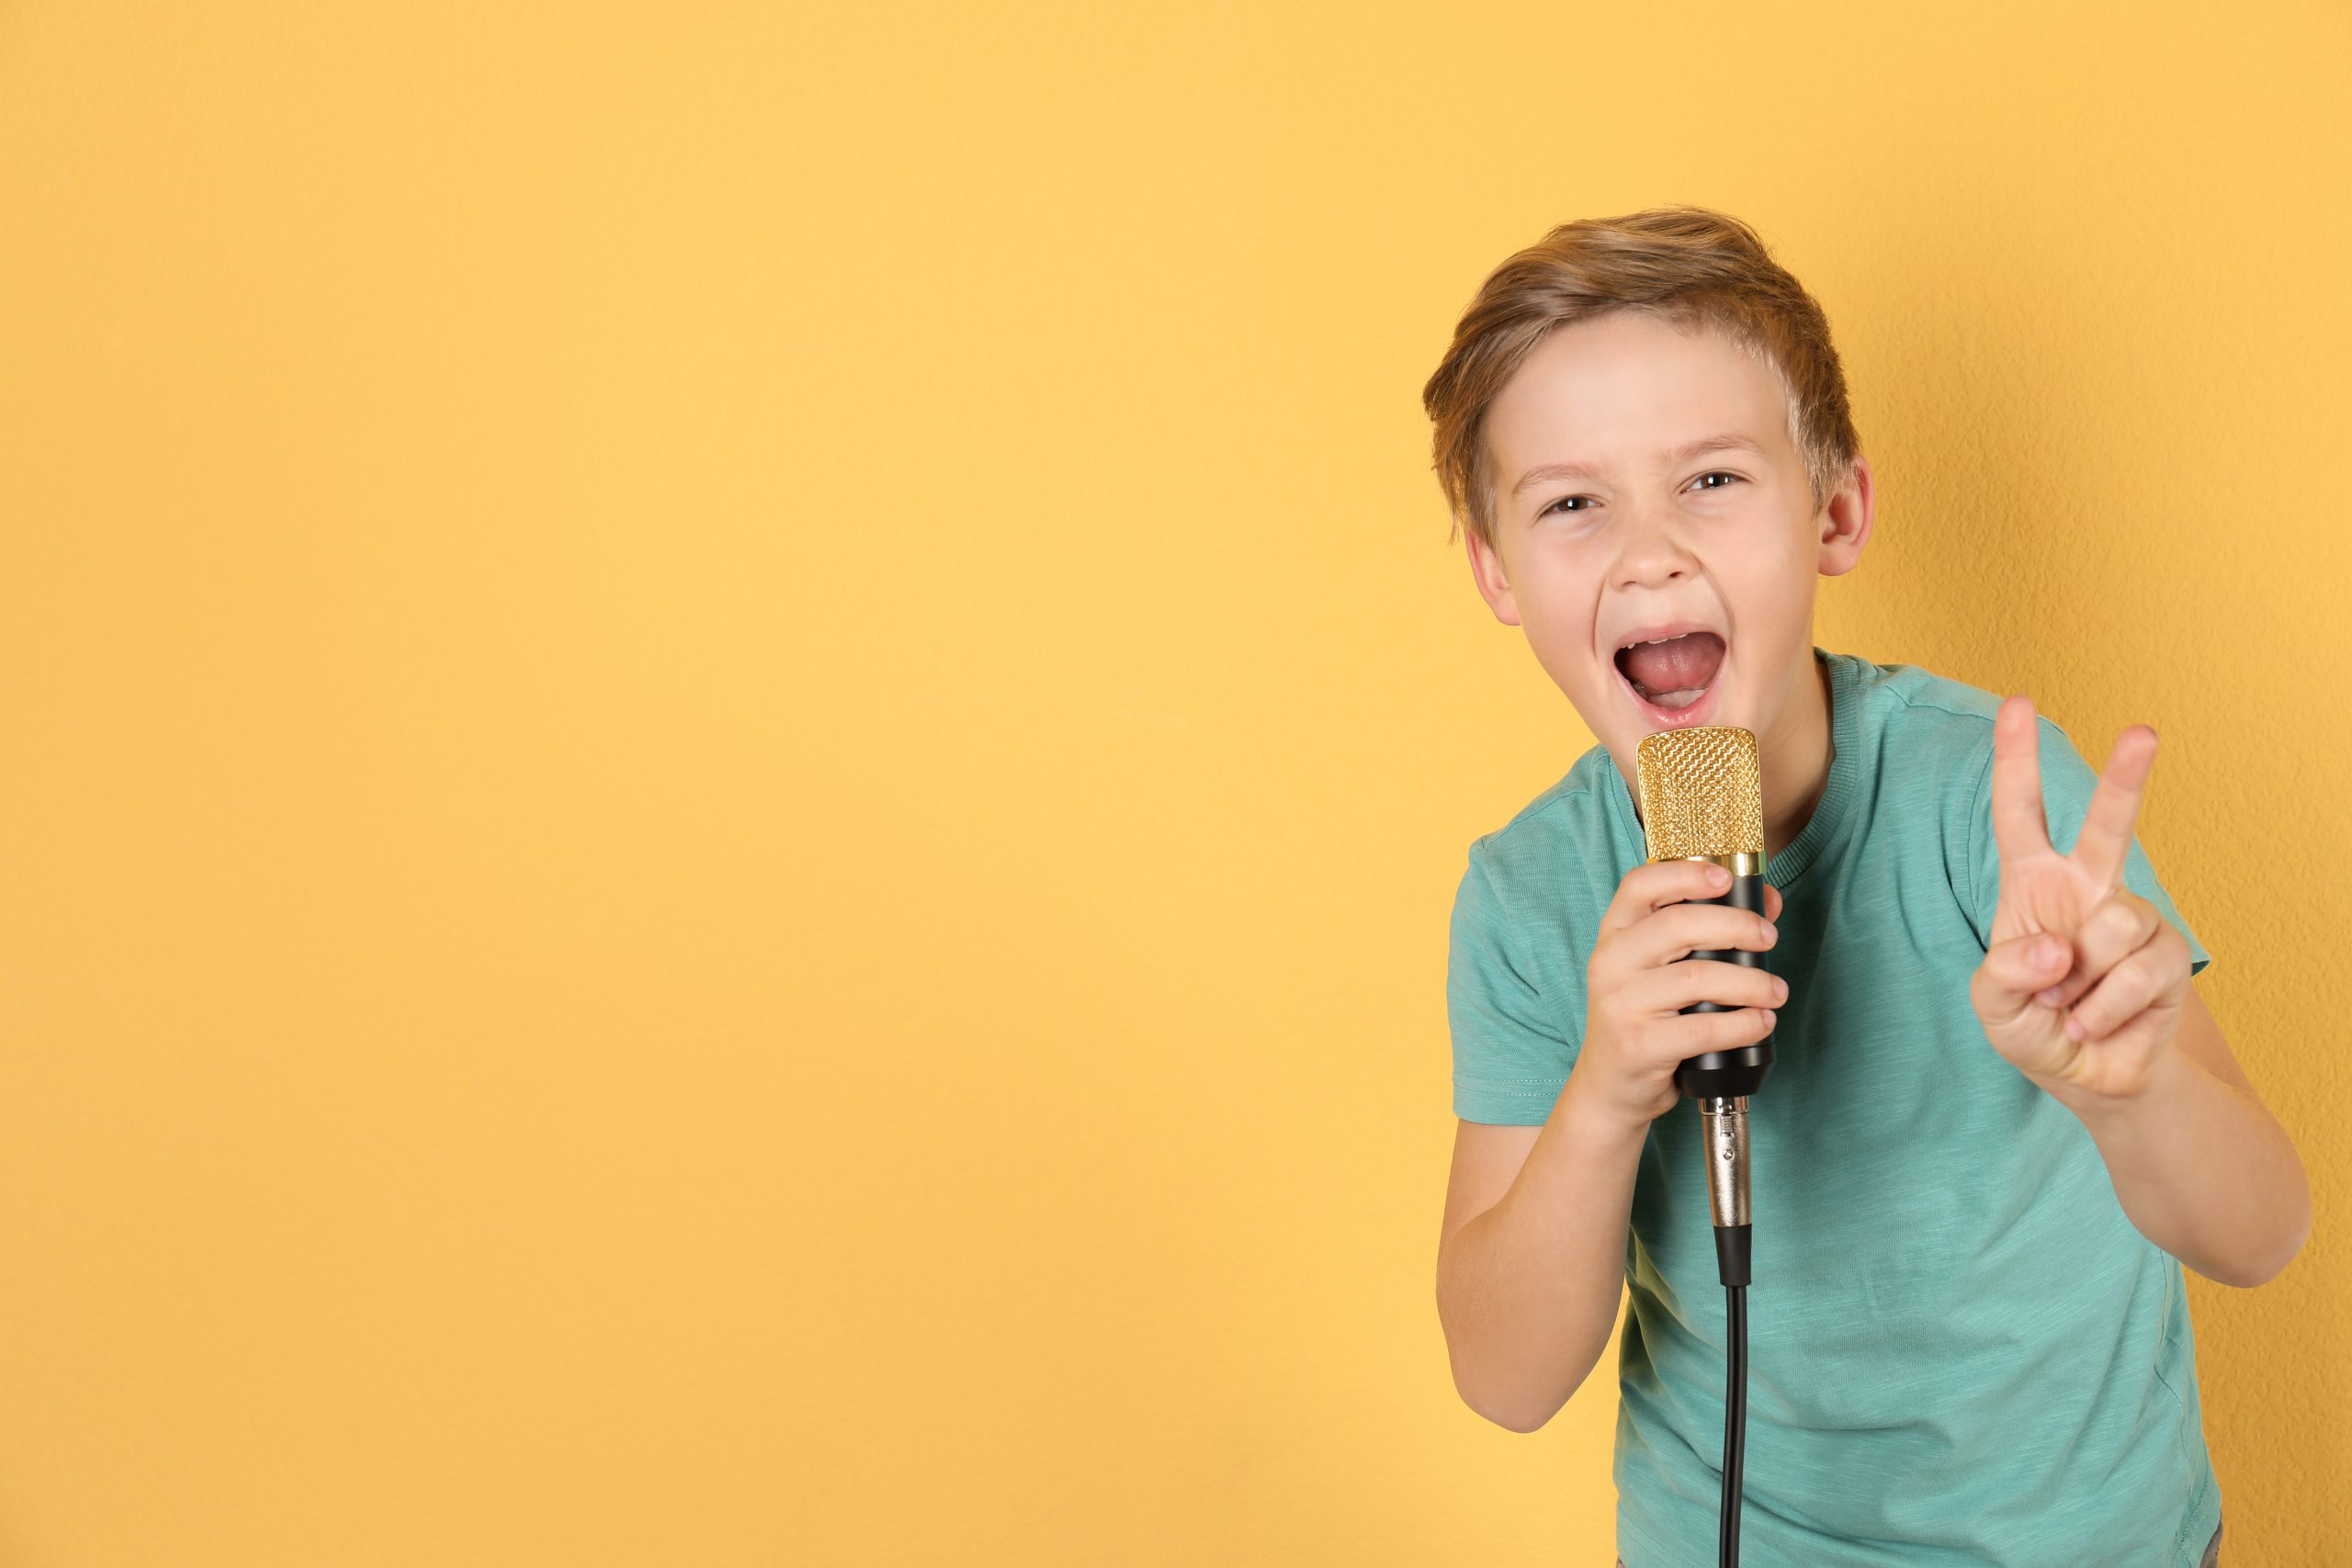 Cute boy singing in microphone on color background. Space for text